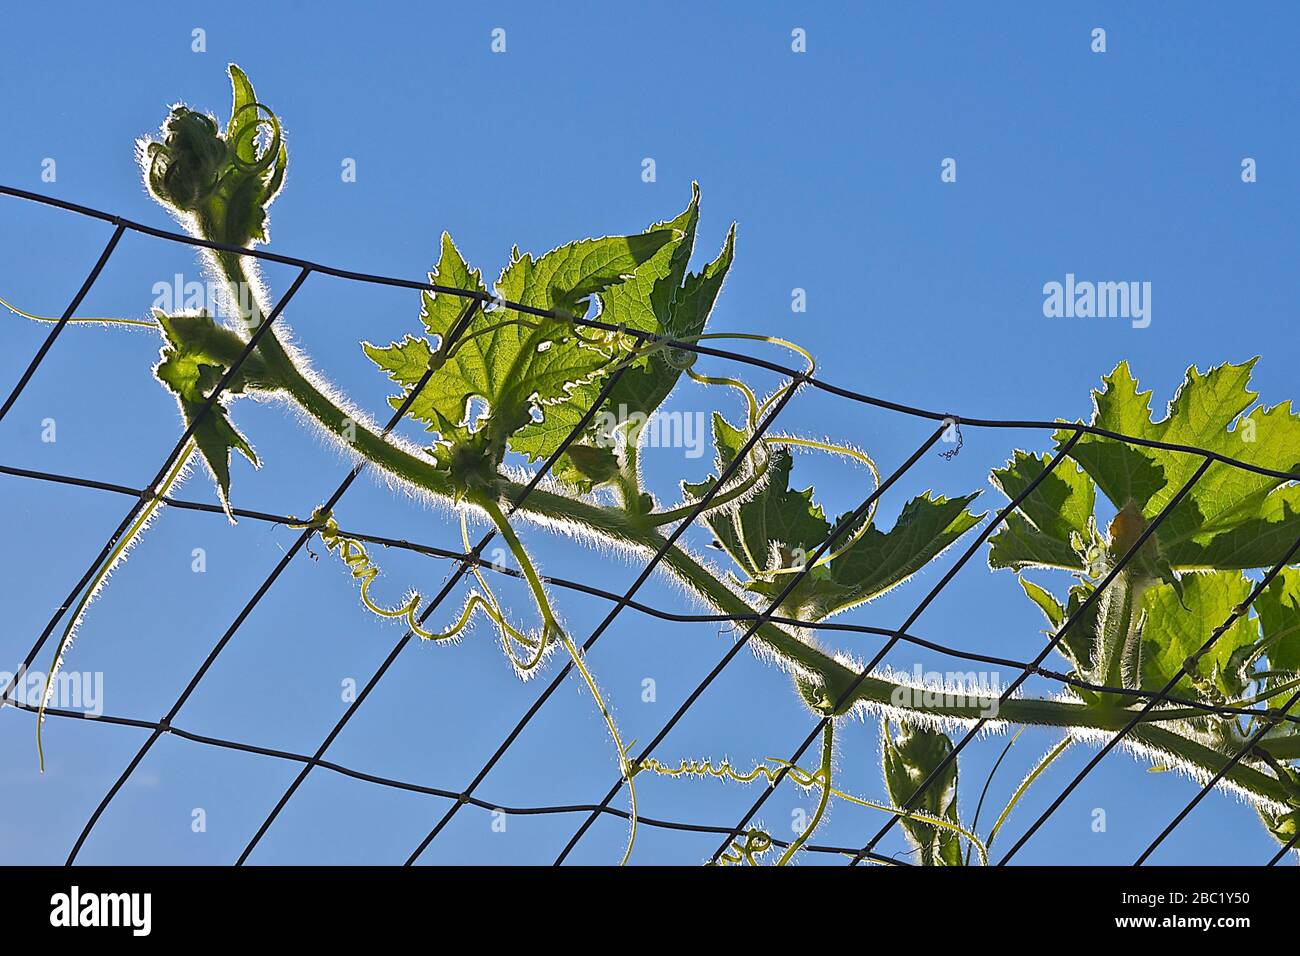 Organic winter melon plant climbing up the chicken wire mesh, part of urban gardening project, is seen on a sunny summer day Stock Photo